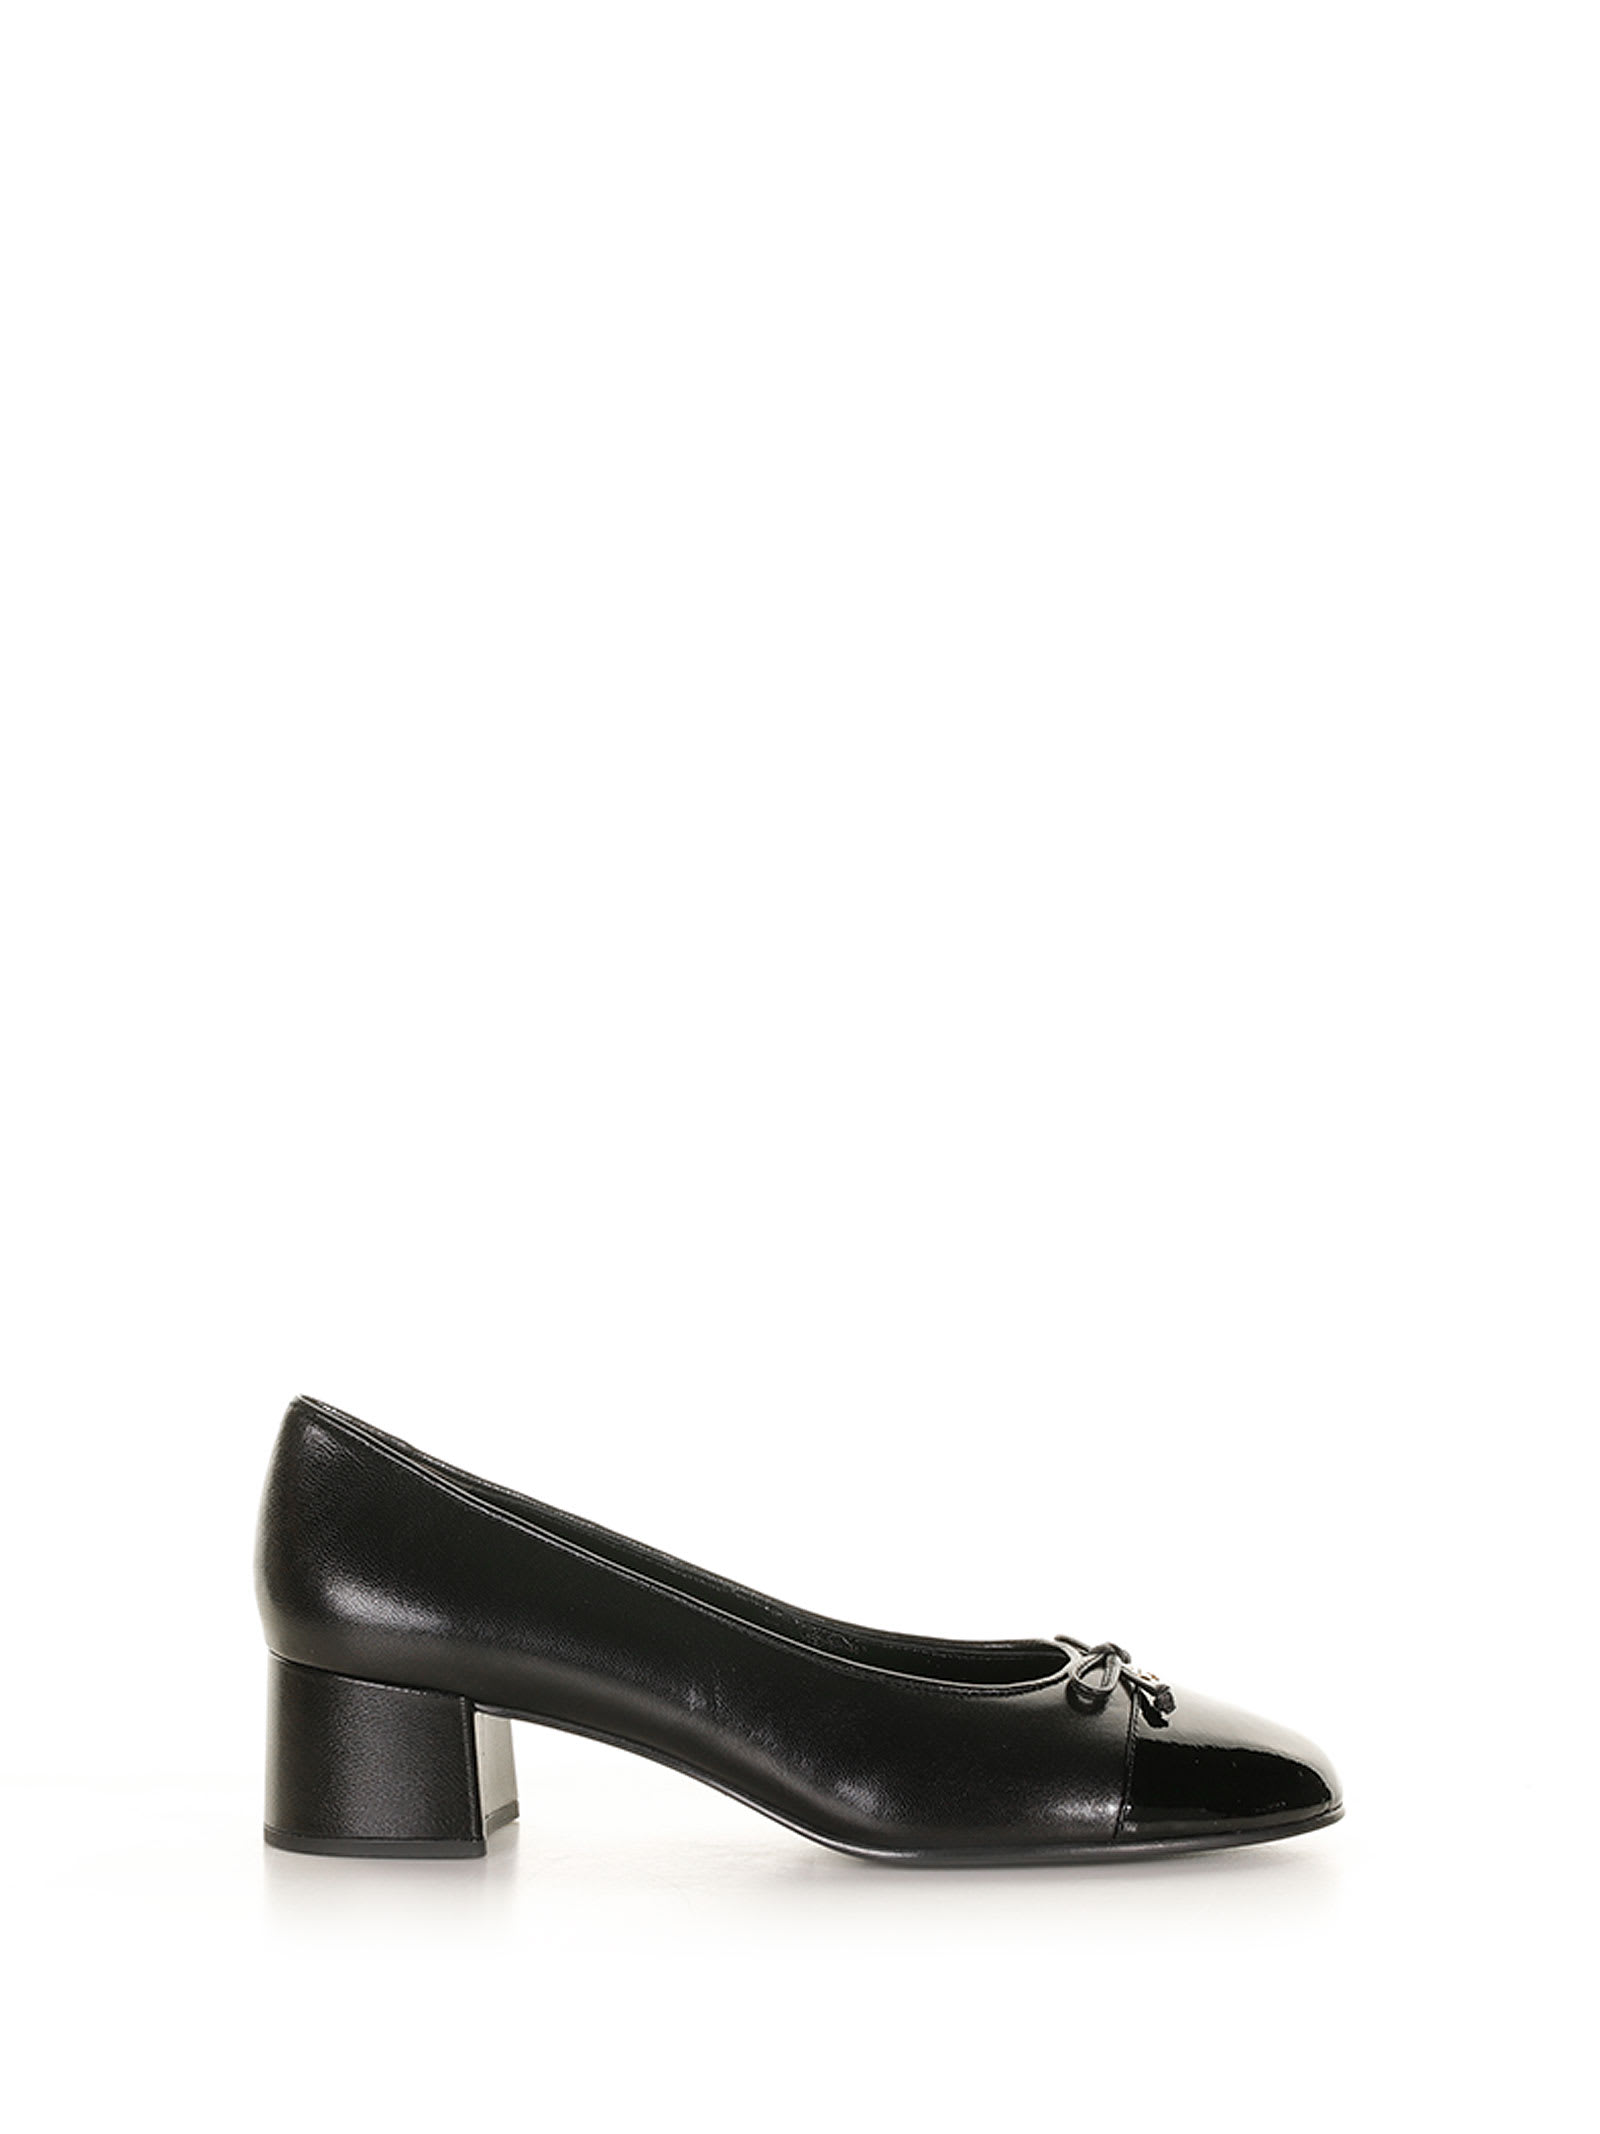 TORY BURCH BLACK LEATHER PUMP WITH BOW